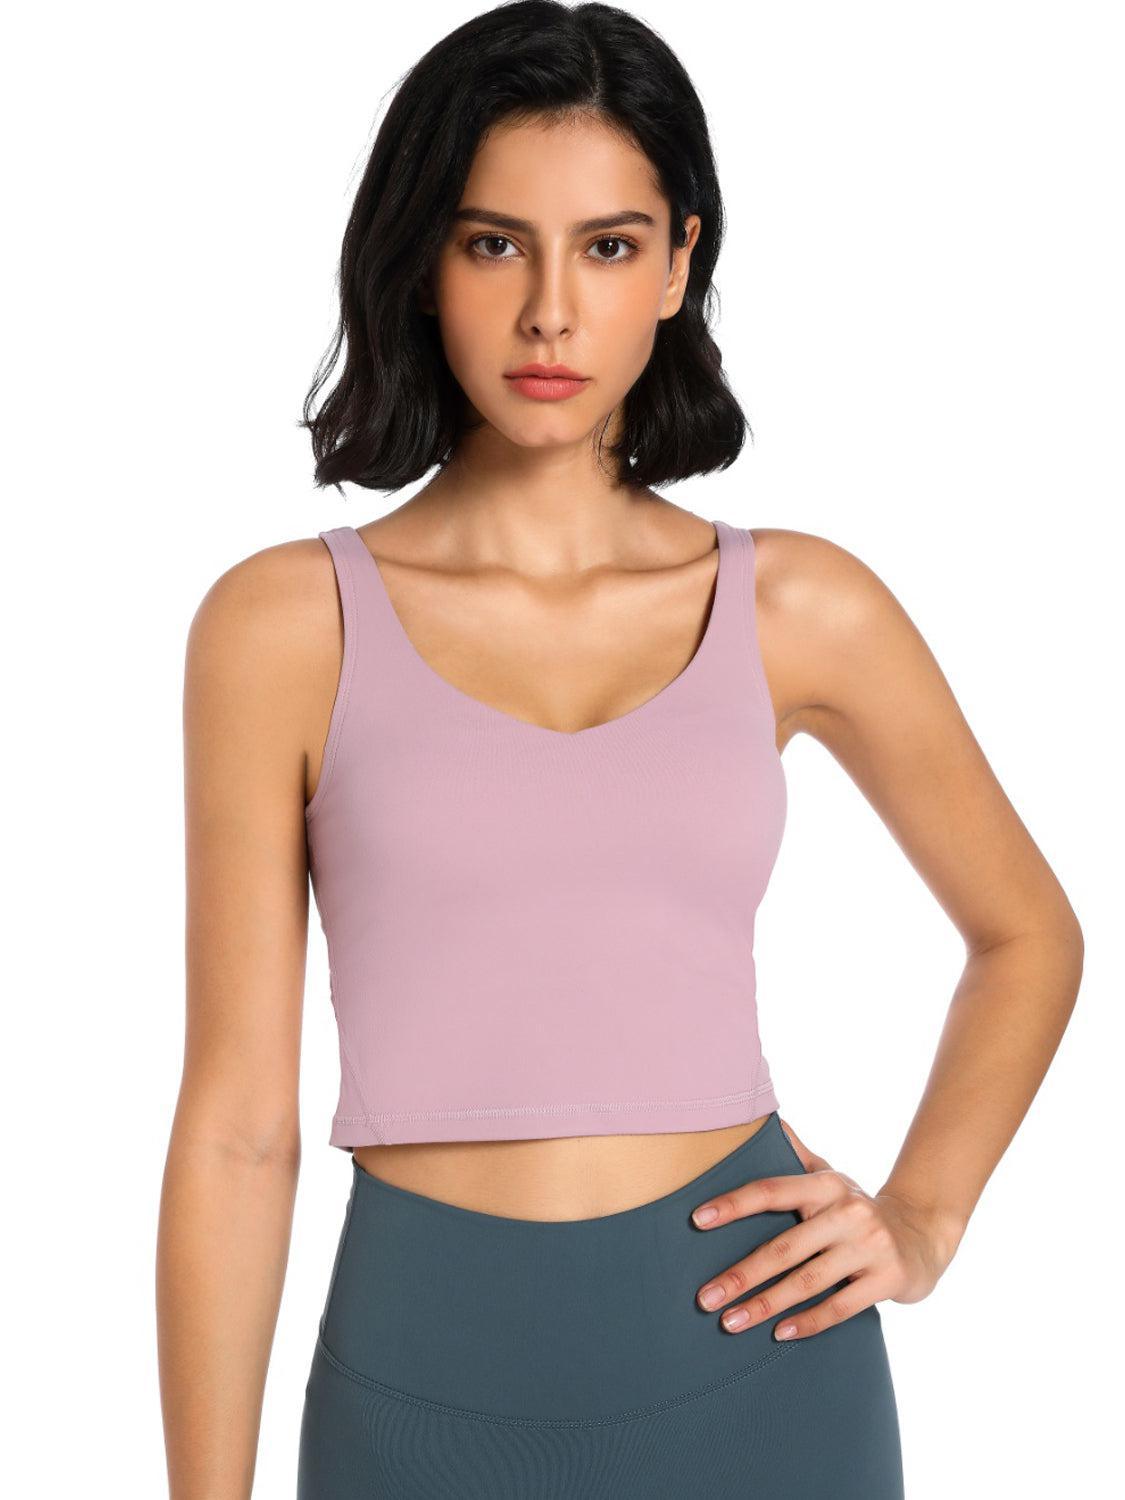 a woman wearing a pink crop top